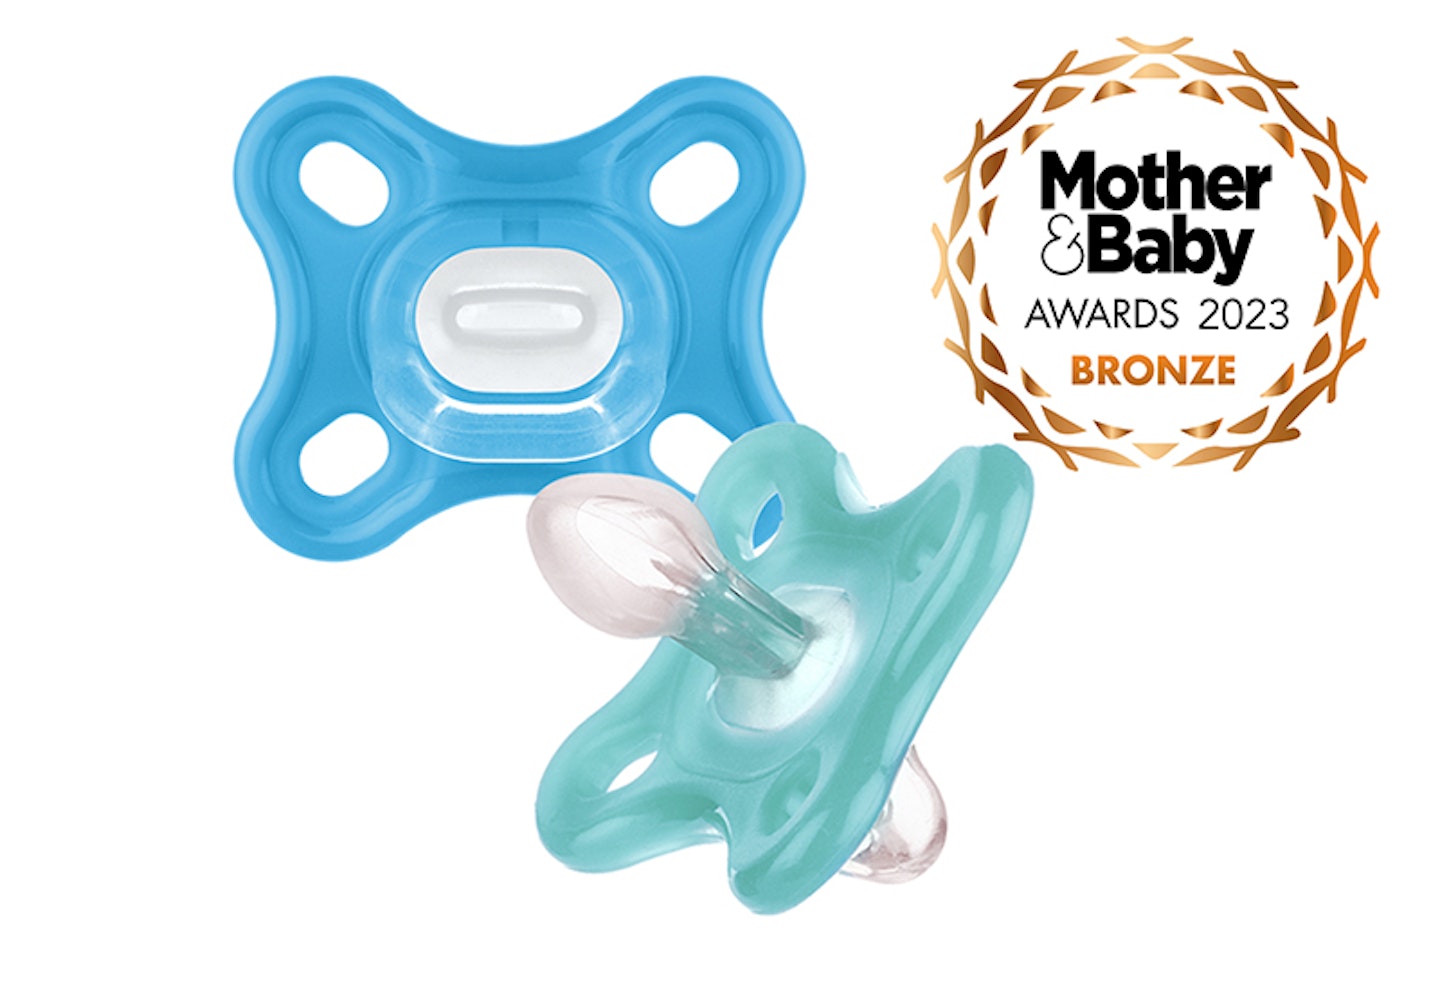 MAM Comfort Soother M&B awrds 2023